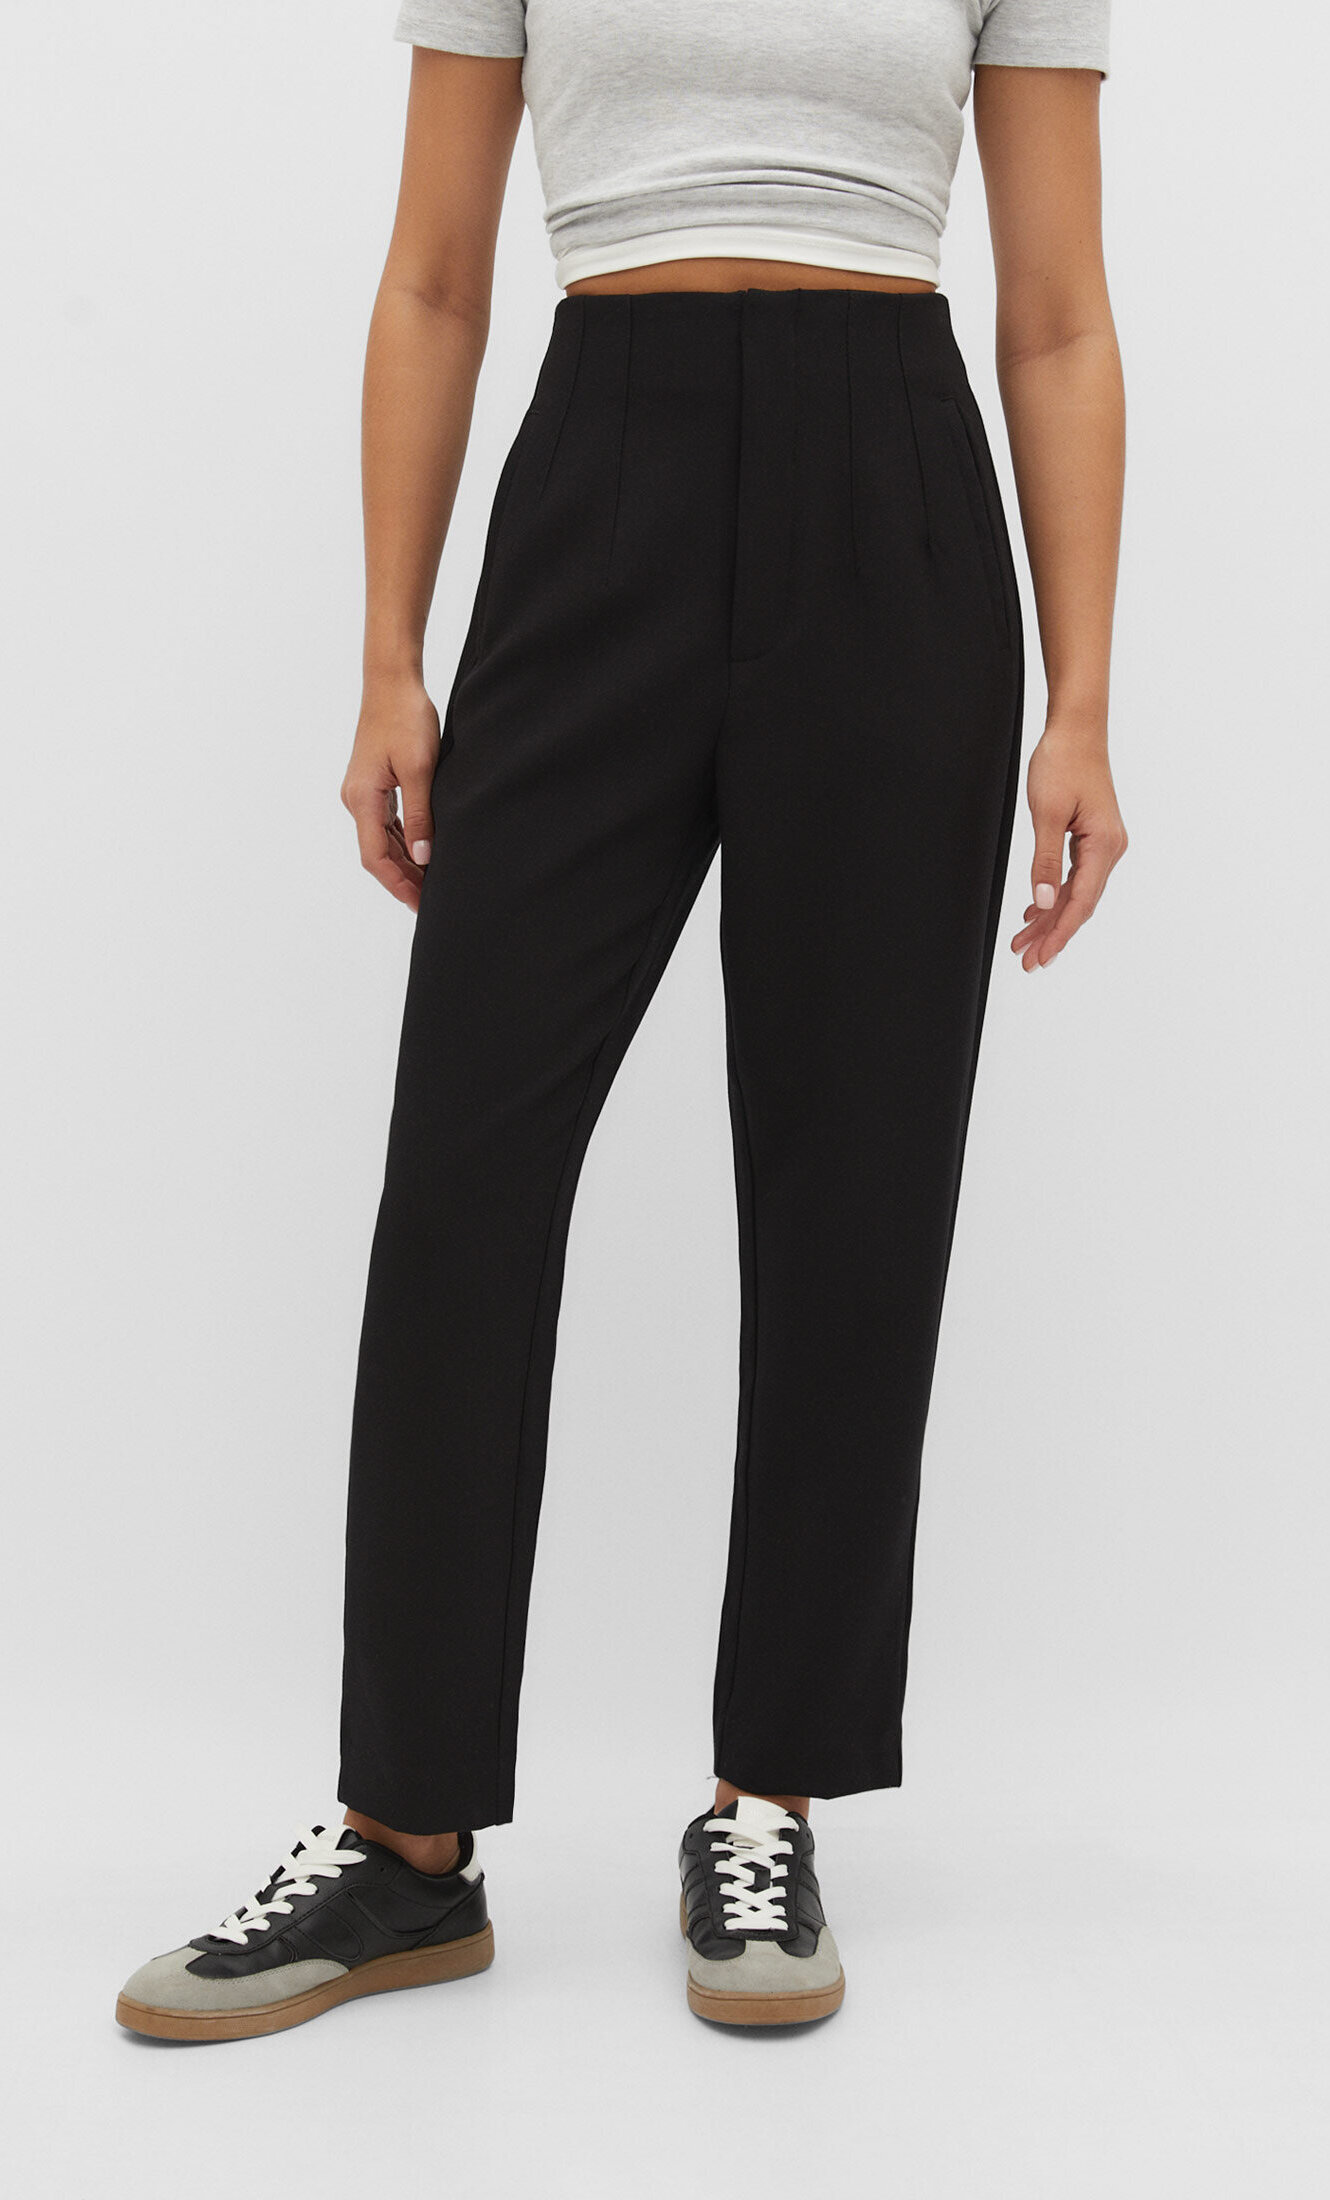 REDValentino Stretch Frisottine Pants With Darts Detail  Trousers for  Women  REDValentino EStore